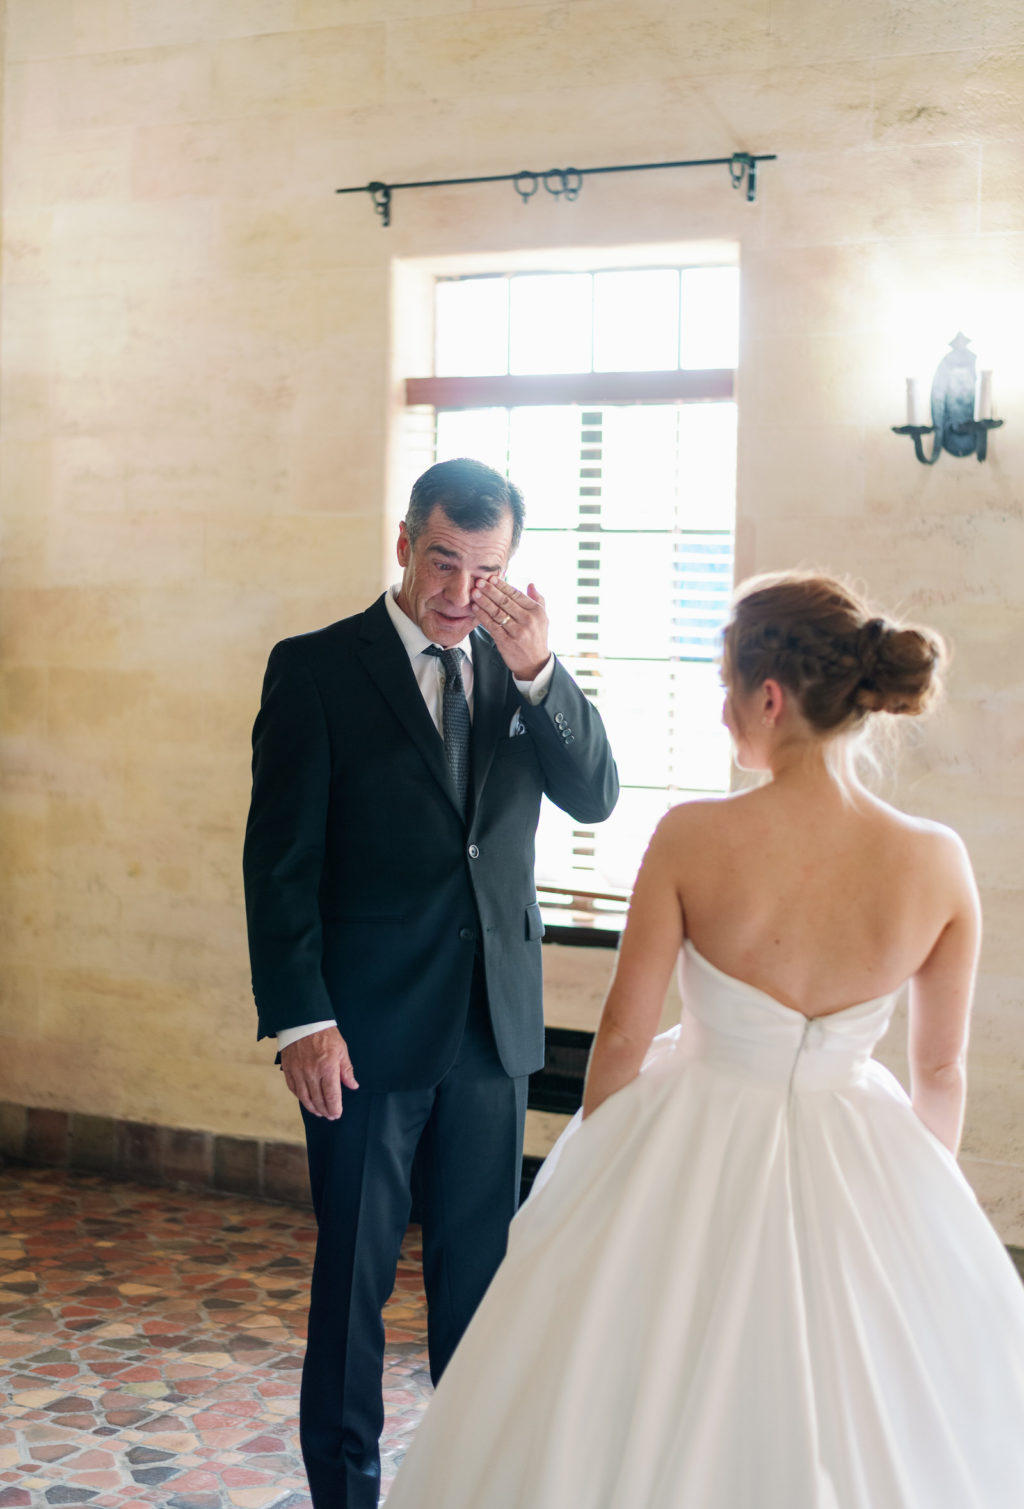 Bride and Dad First Look Wedding Photo | Tampa Bay Wedding Photographer Dewitt for Love Photography